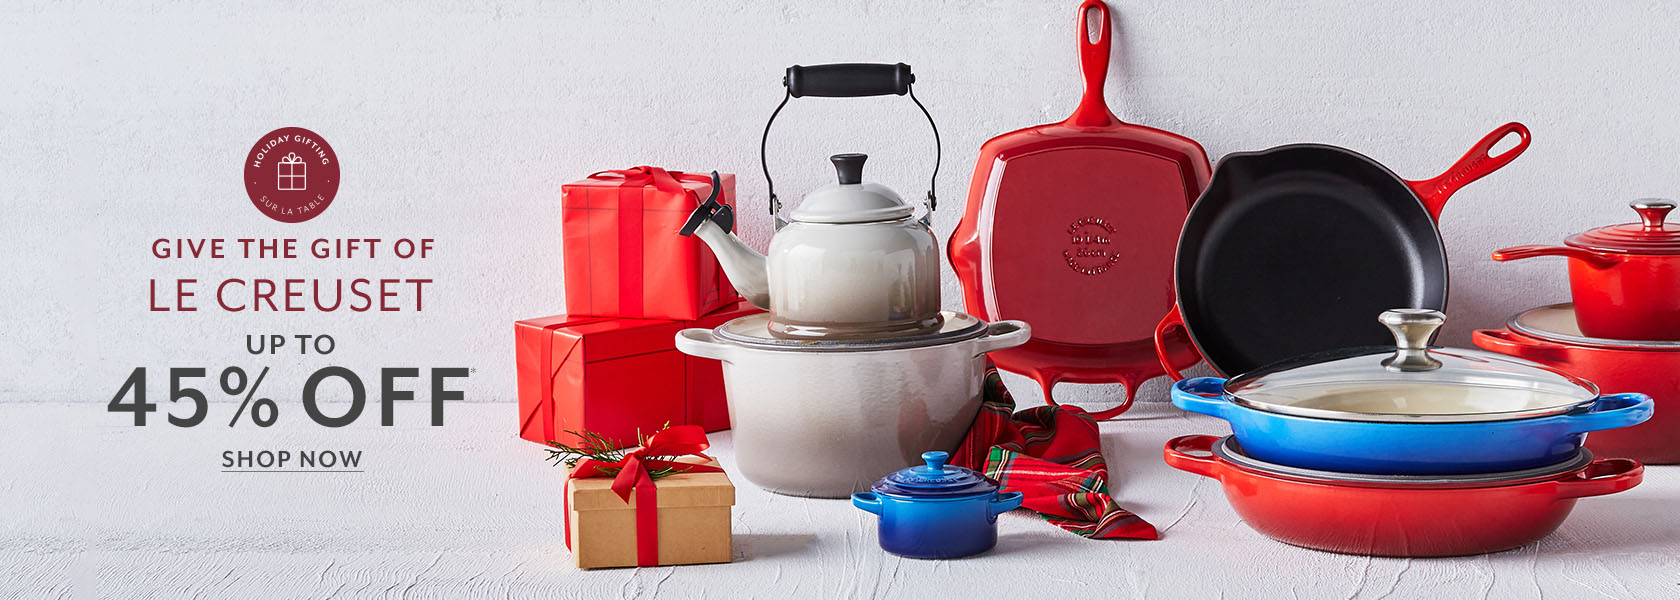 Give the Gift of Le Creuset up to 45% off. Shop Now.